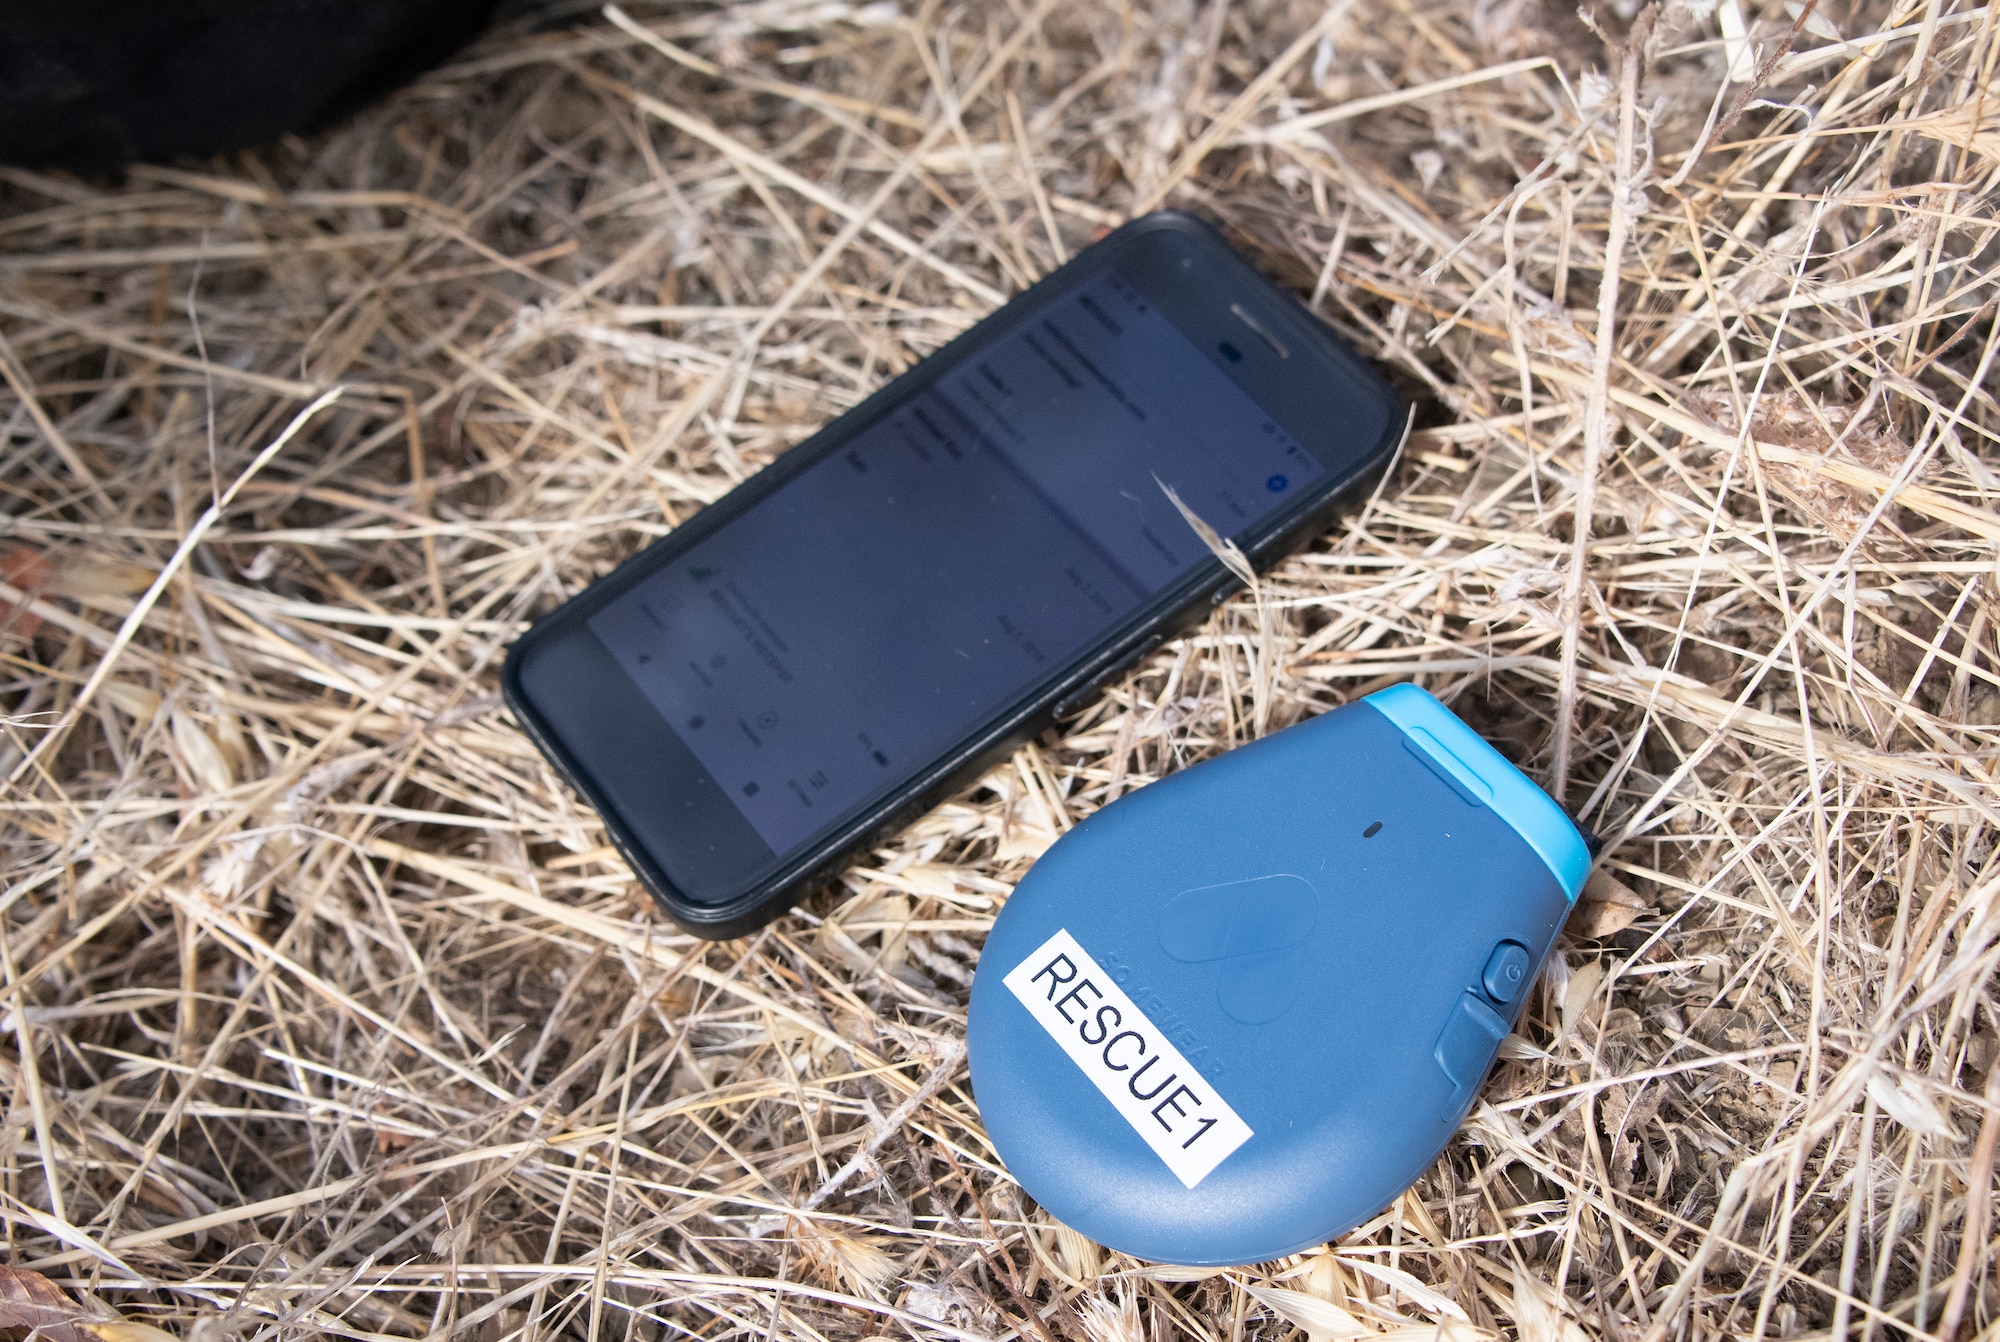 U.S. Air Force Survival, Evasion, Resistance and Escape personnel field test a developmental device Somewear Lab’s Hotspot Aug. 5, 2019, in a remote area near Travis Air Force Base, California. Paired with a combat-configured smartphone, the system supports digital maps for navigation, modern digital satellite messaging and data transmission, and comprehensive blue-force tracking for the tactical operations center or any command. This device is one of the lightest and smallest of its kind and a major enhancement from the current survival kit.